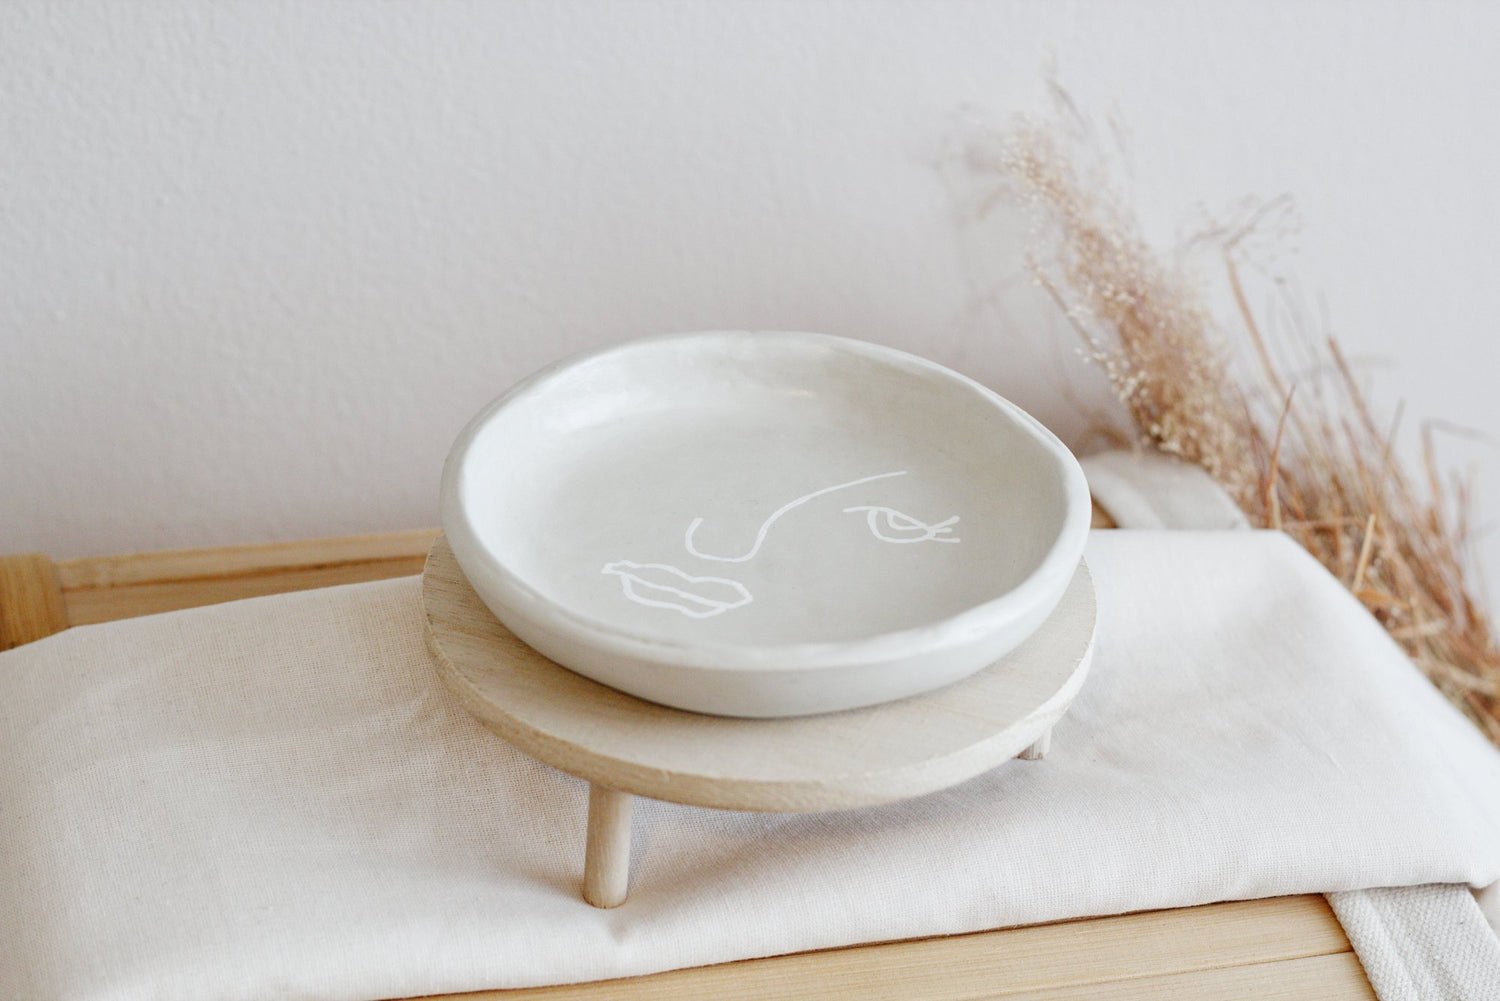 Simple white minimalist face plate by maker Afton by Palm